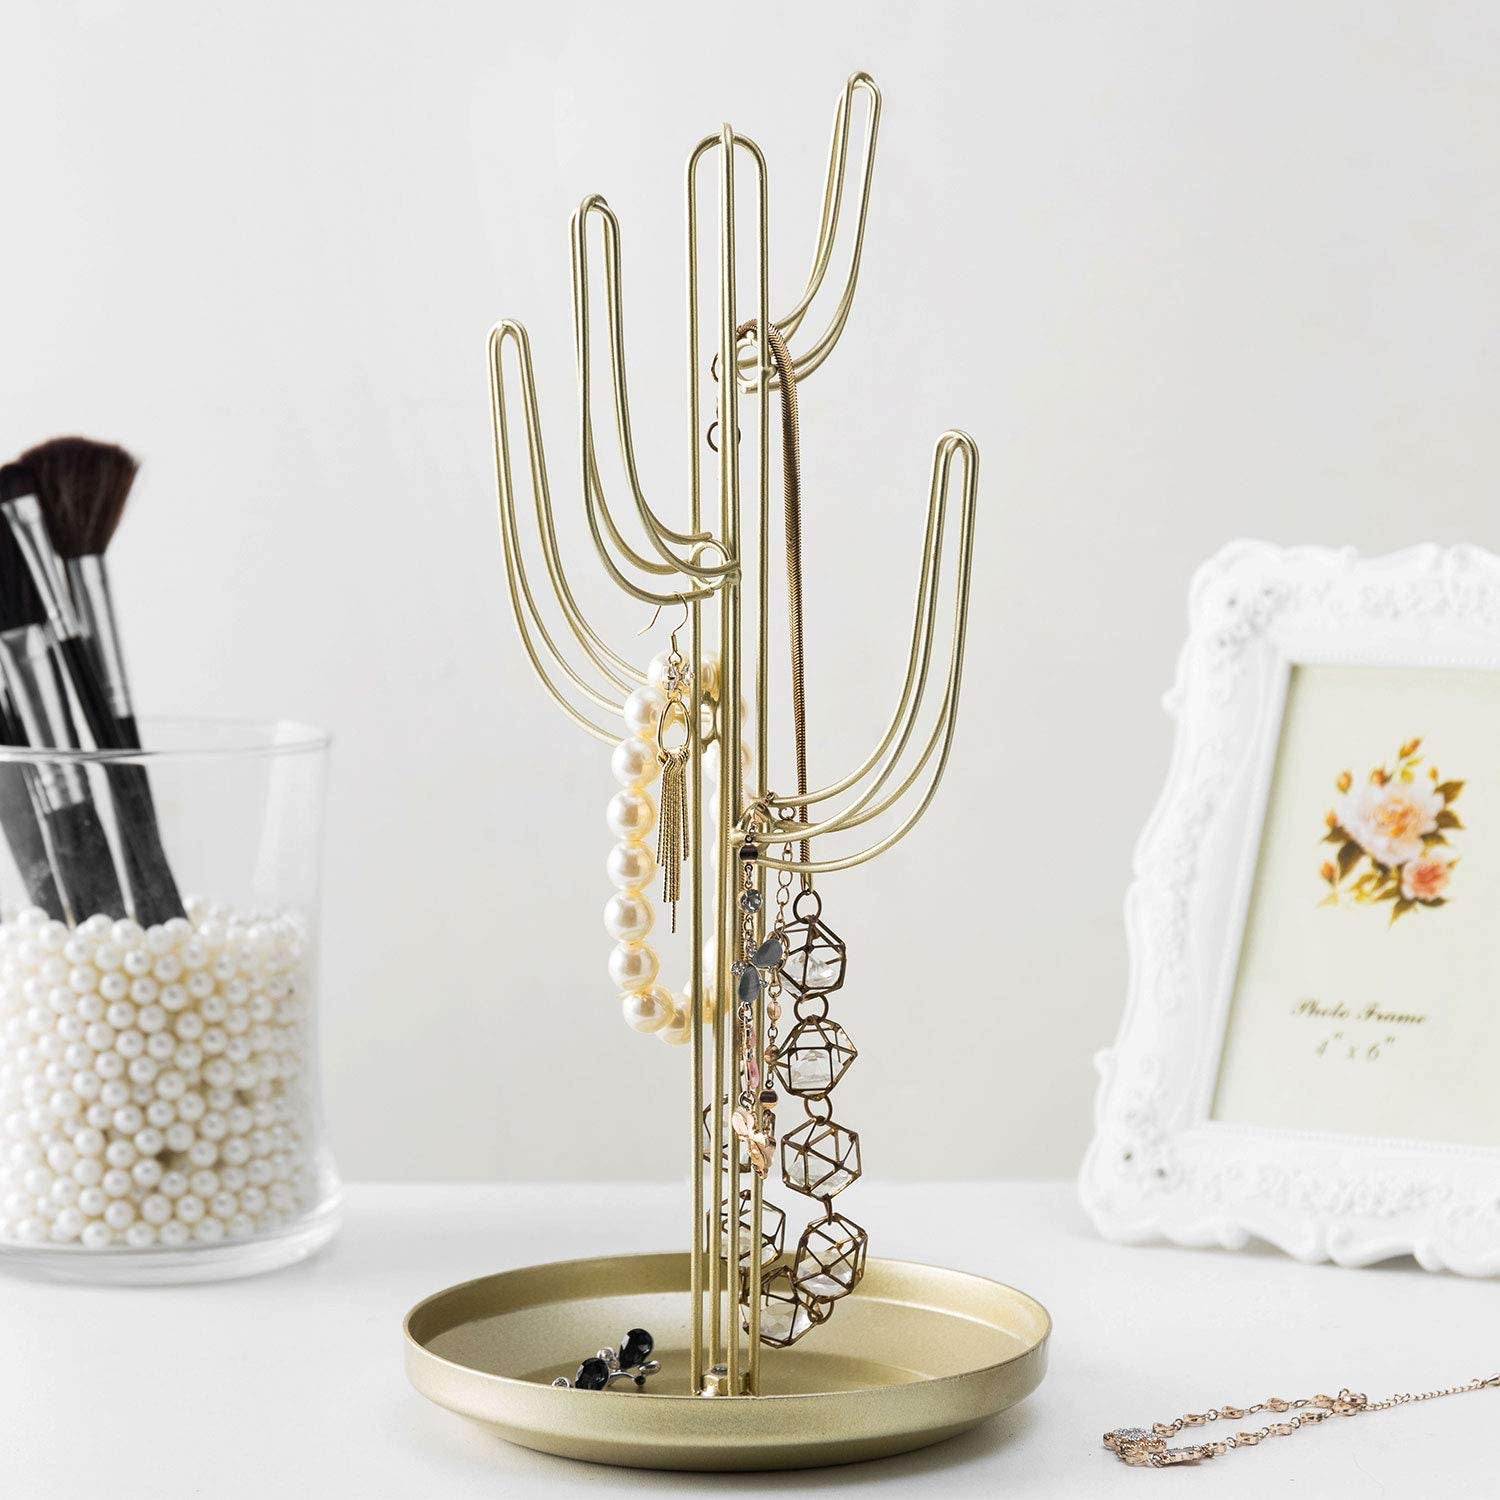 the gold cactus jewelry stand holding earrings and necklaces